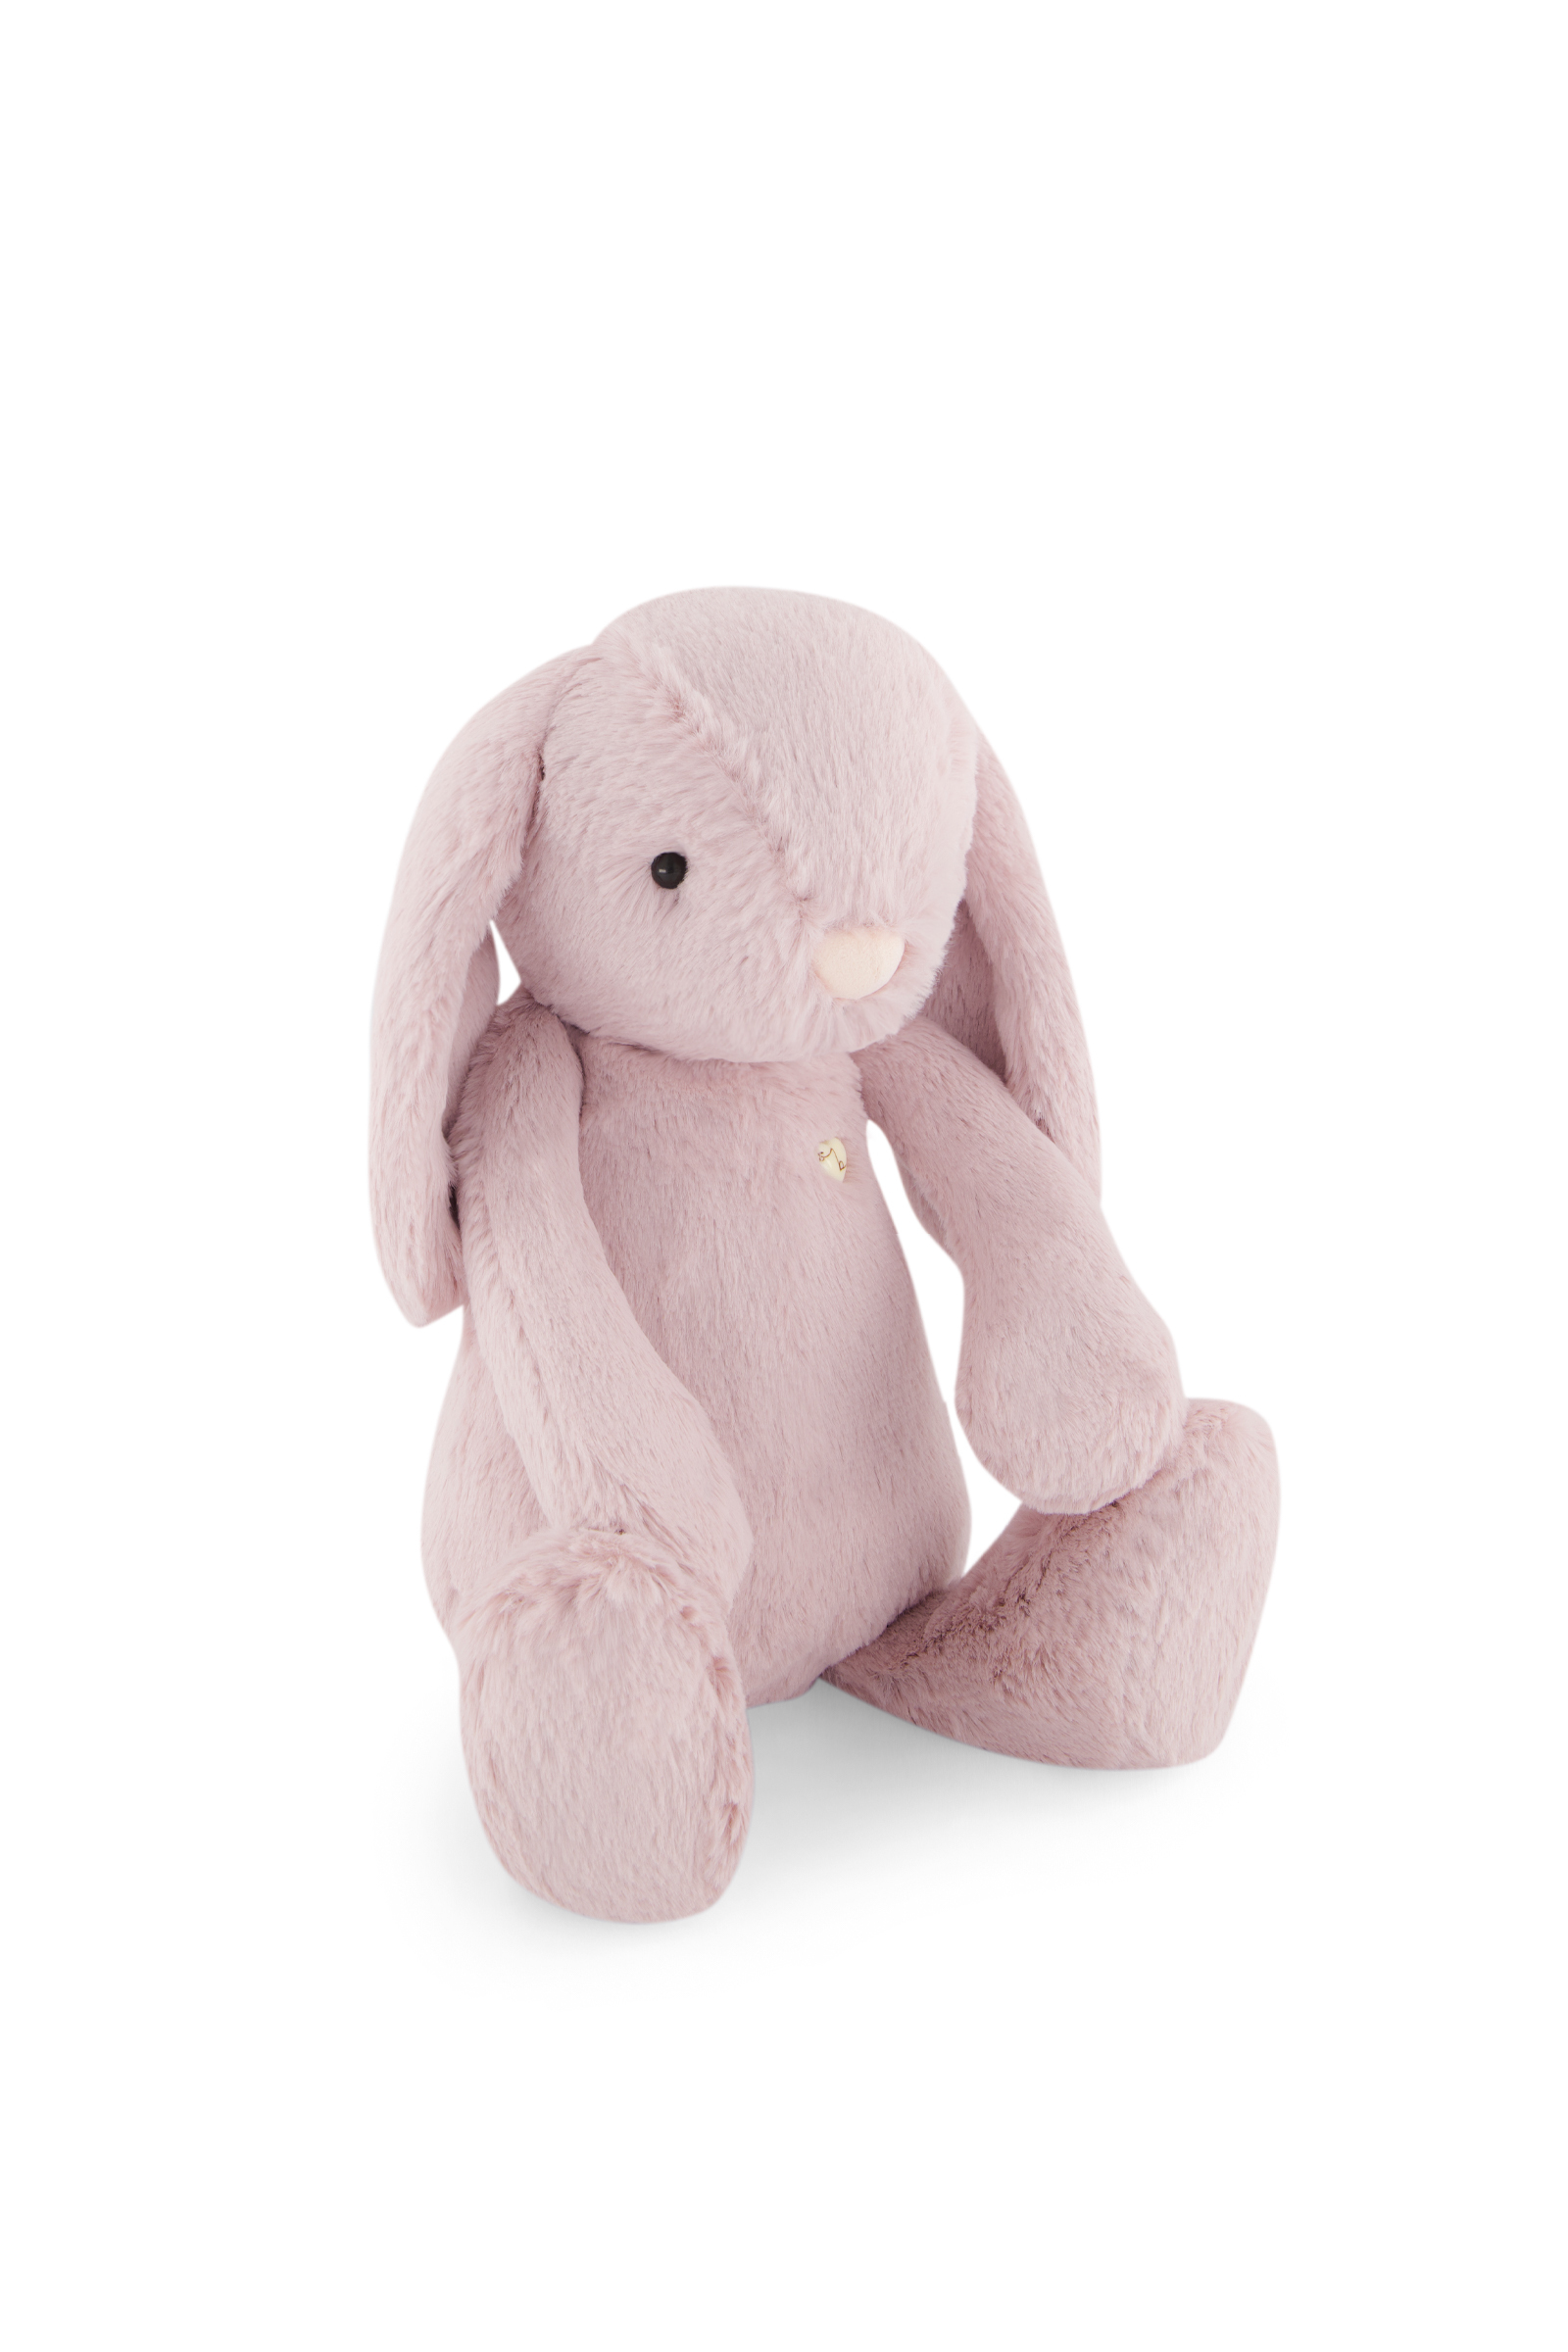 Snuggle Bunnies 30cm Penelope The Bunny - Blossom Front_Side